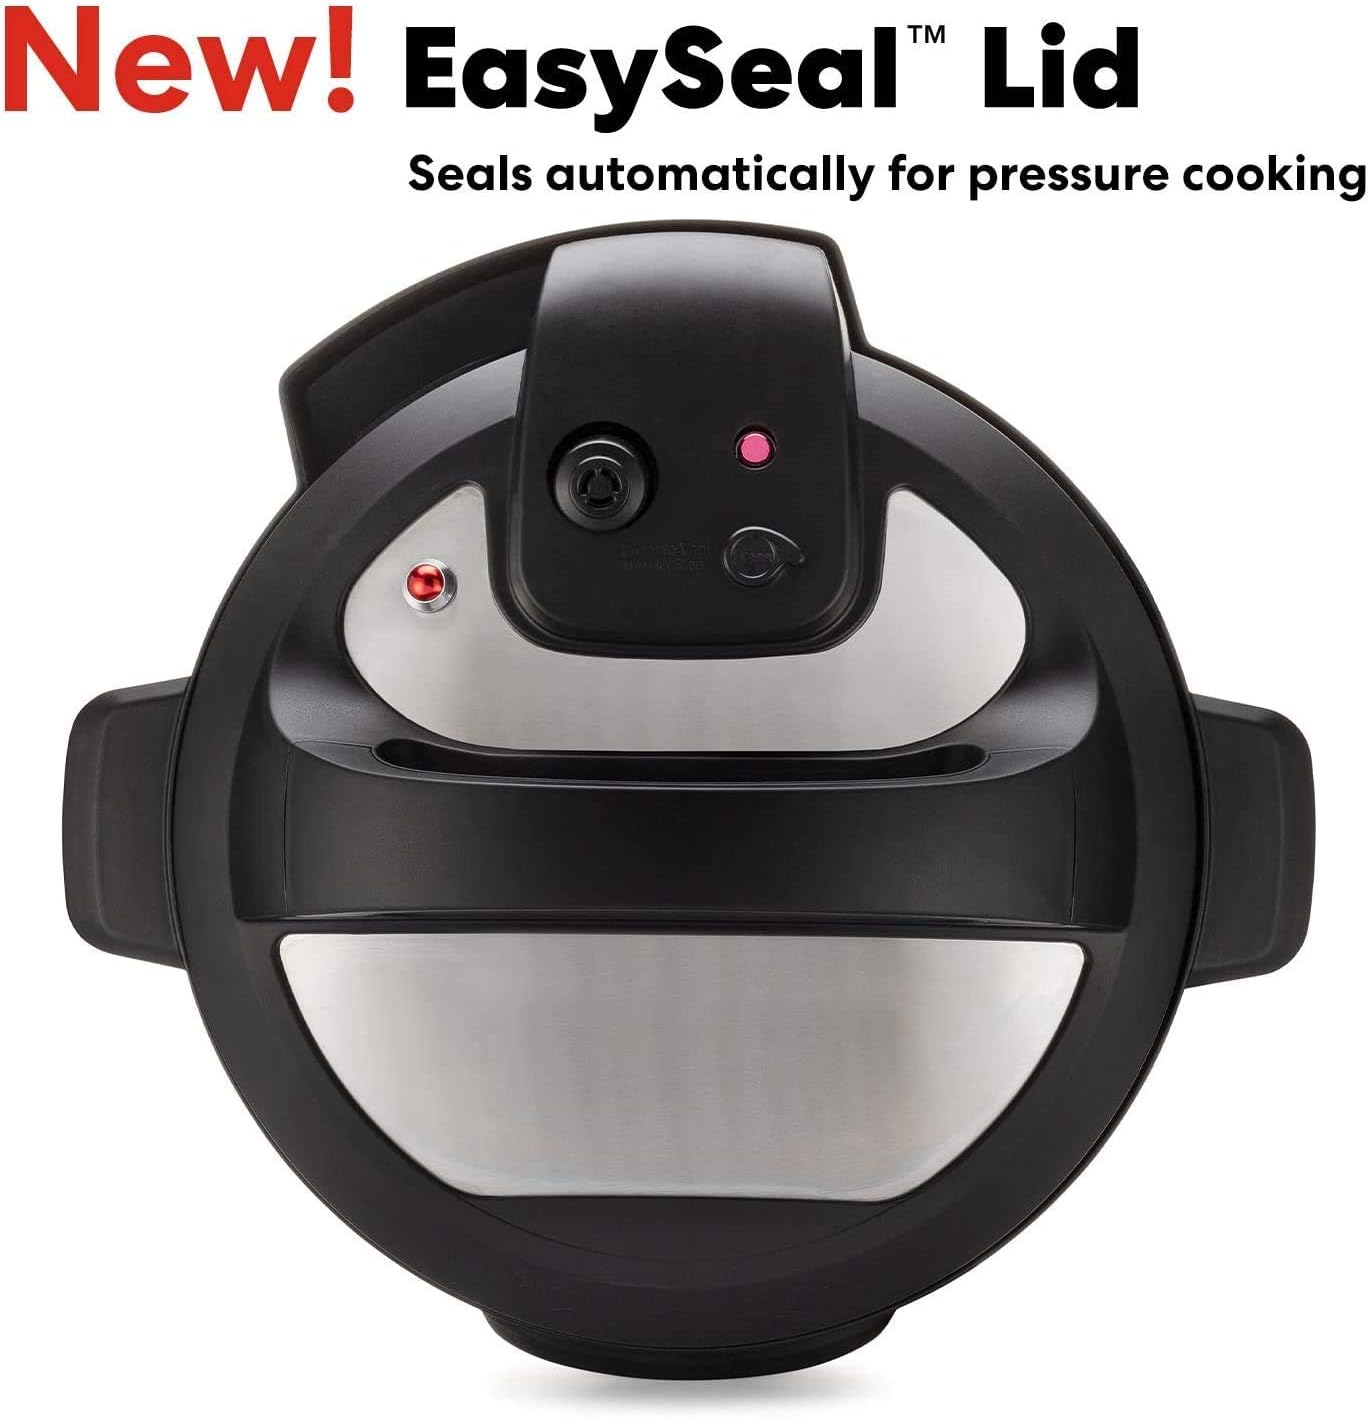 https://bigbigmart.com/wp-content/uploads/2023/07/Instant-Pot-Duo-Crisp-11-in-1-Air-Fryer-and-Electric-Pressure-Cooker-Combo-with-Multicooker-Lids-that-Air-Fries-Steams-Slow-Cooks-Sautes-Dehydrates-and-More-Free-App-With-1900-Recipes-6-Quart4.jpg